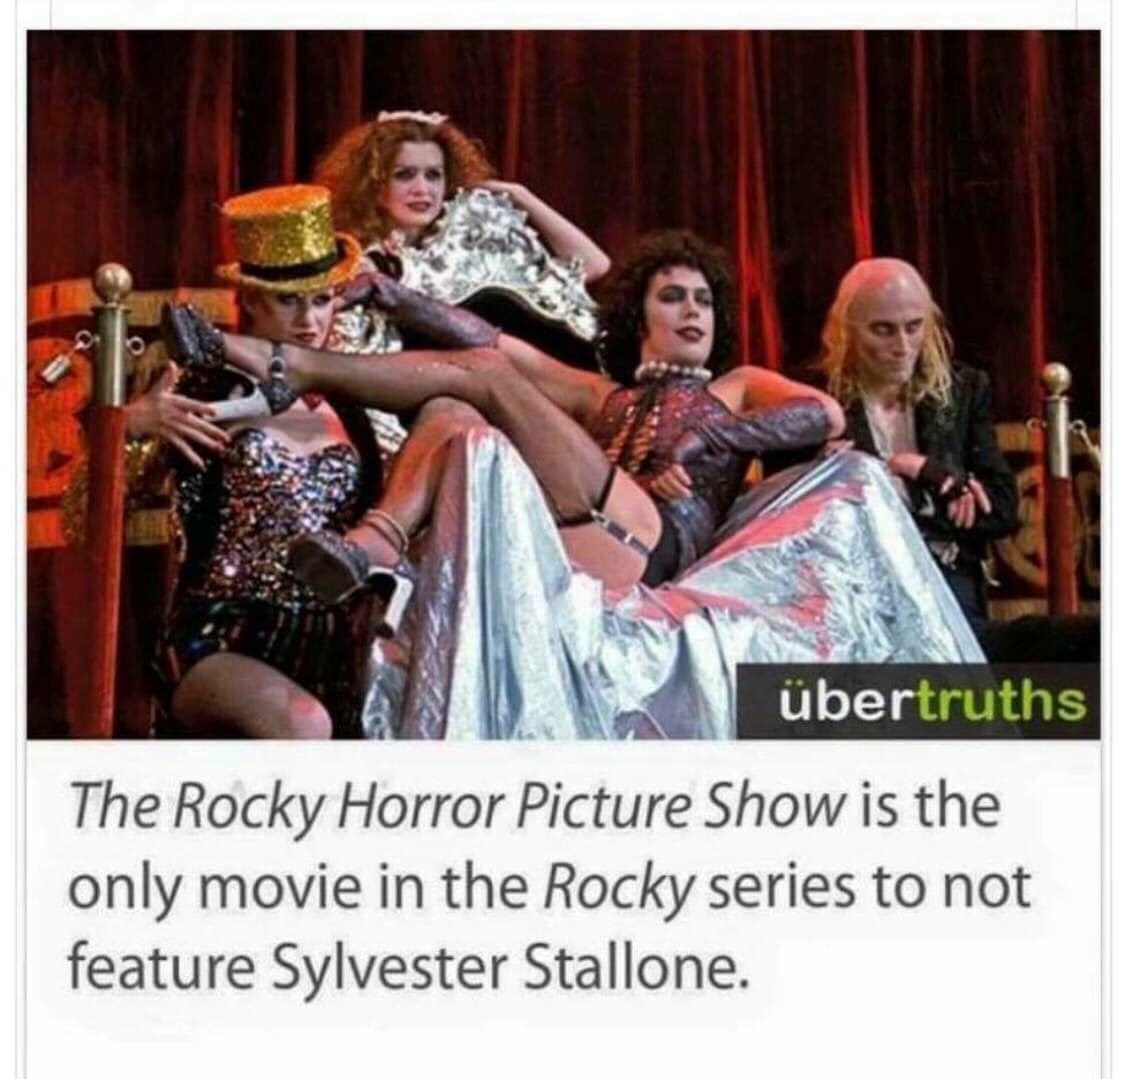 rocky horror show film - bertruths The Rocky Horror Picture Show is the only movie in the Rocky series to not feature Sylvester Stallone.